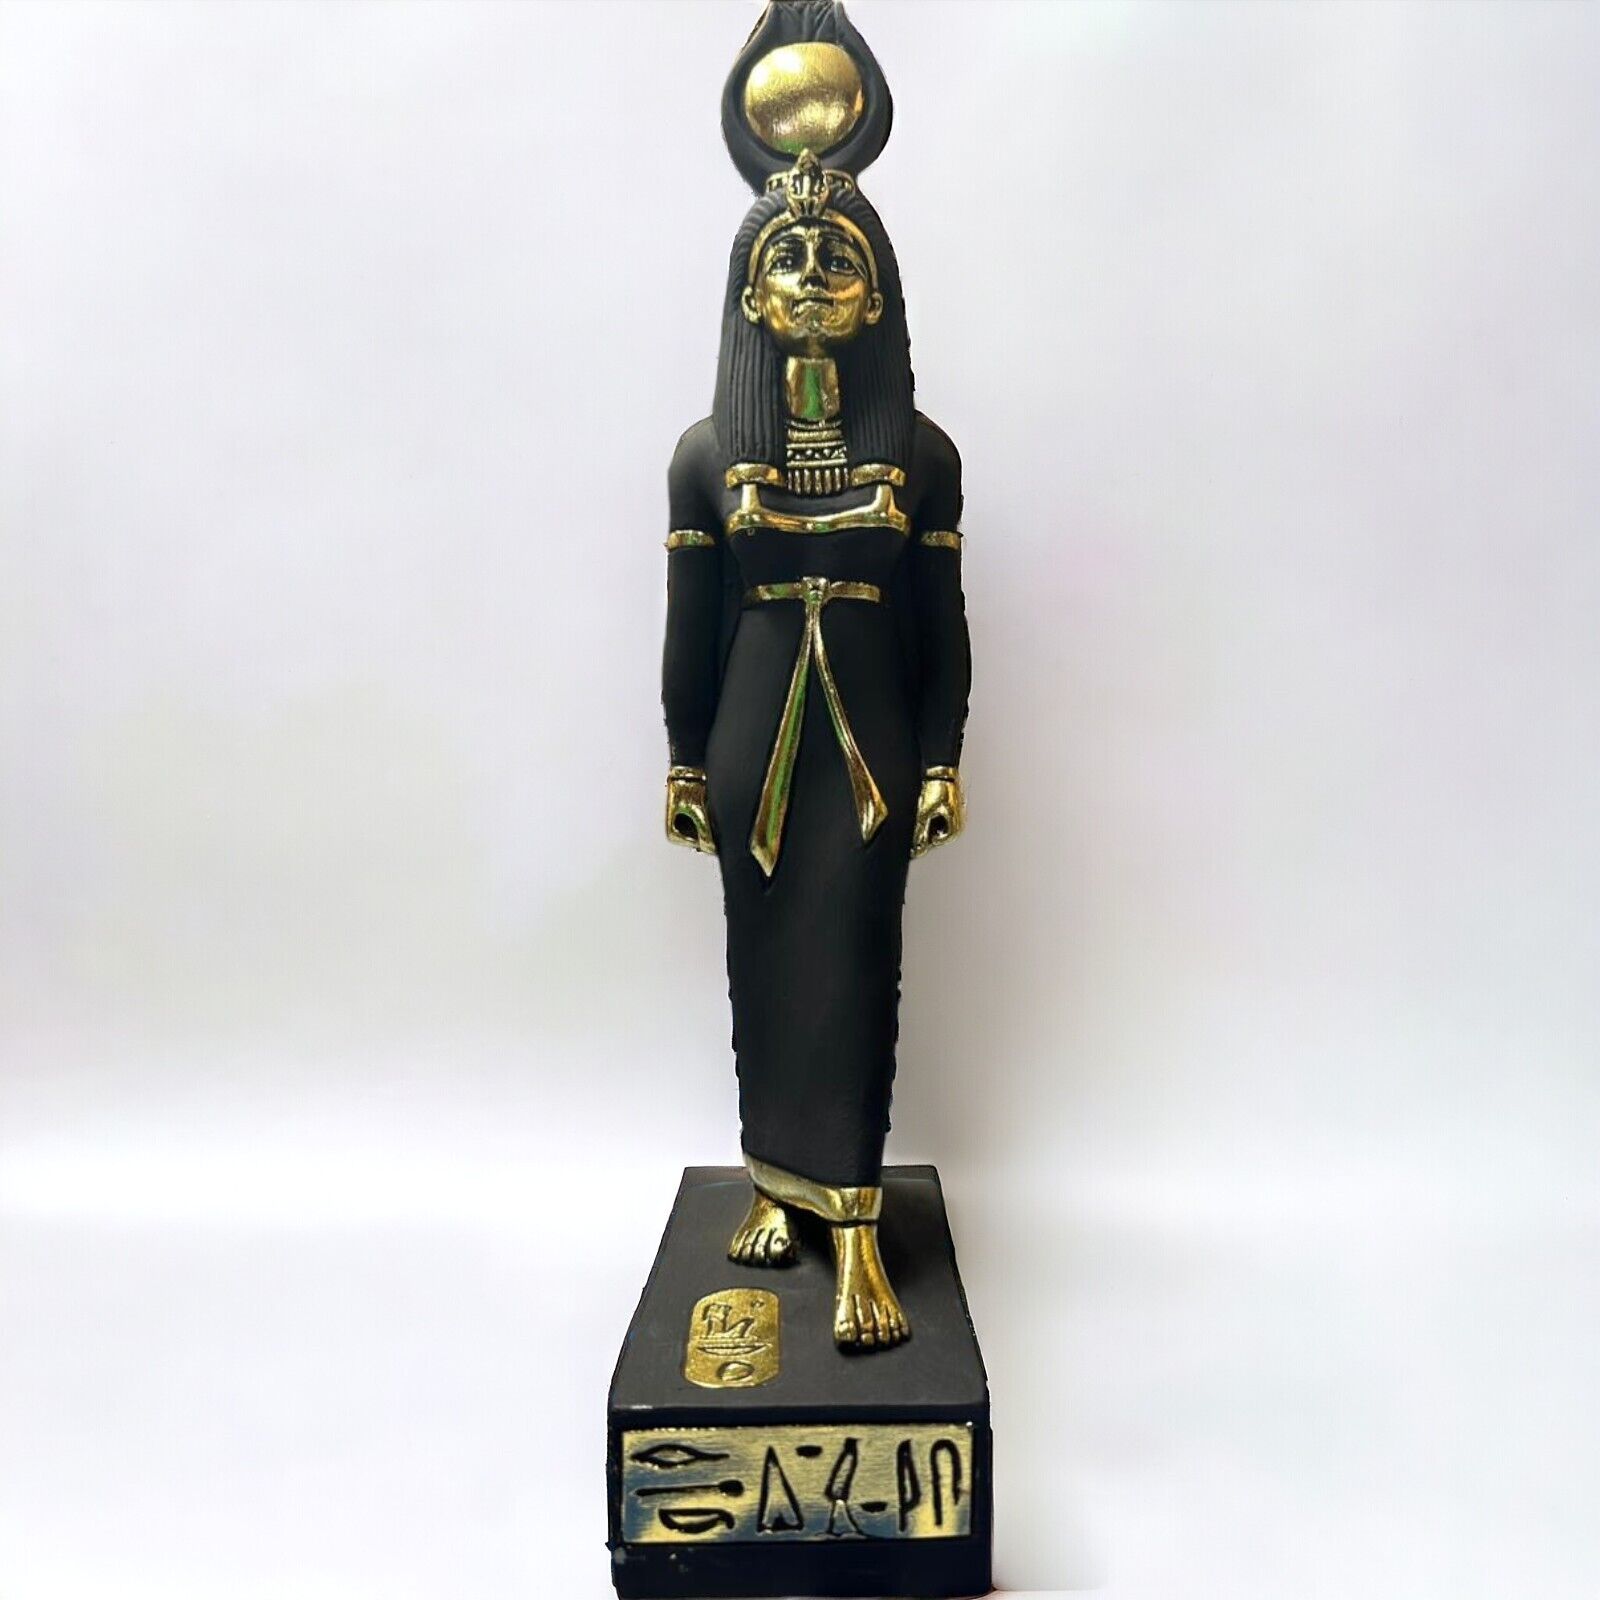 UNIQUE ANCIENT EGYPTIAN ANTIQUITIES Golden Statue Large Of Goddess Isis Rare BC